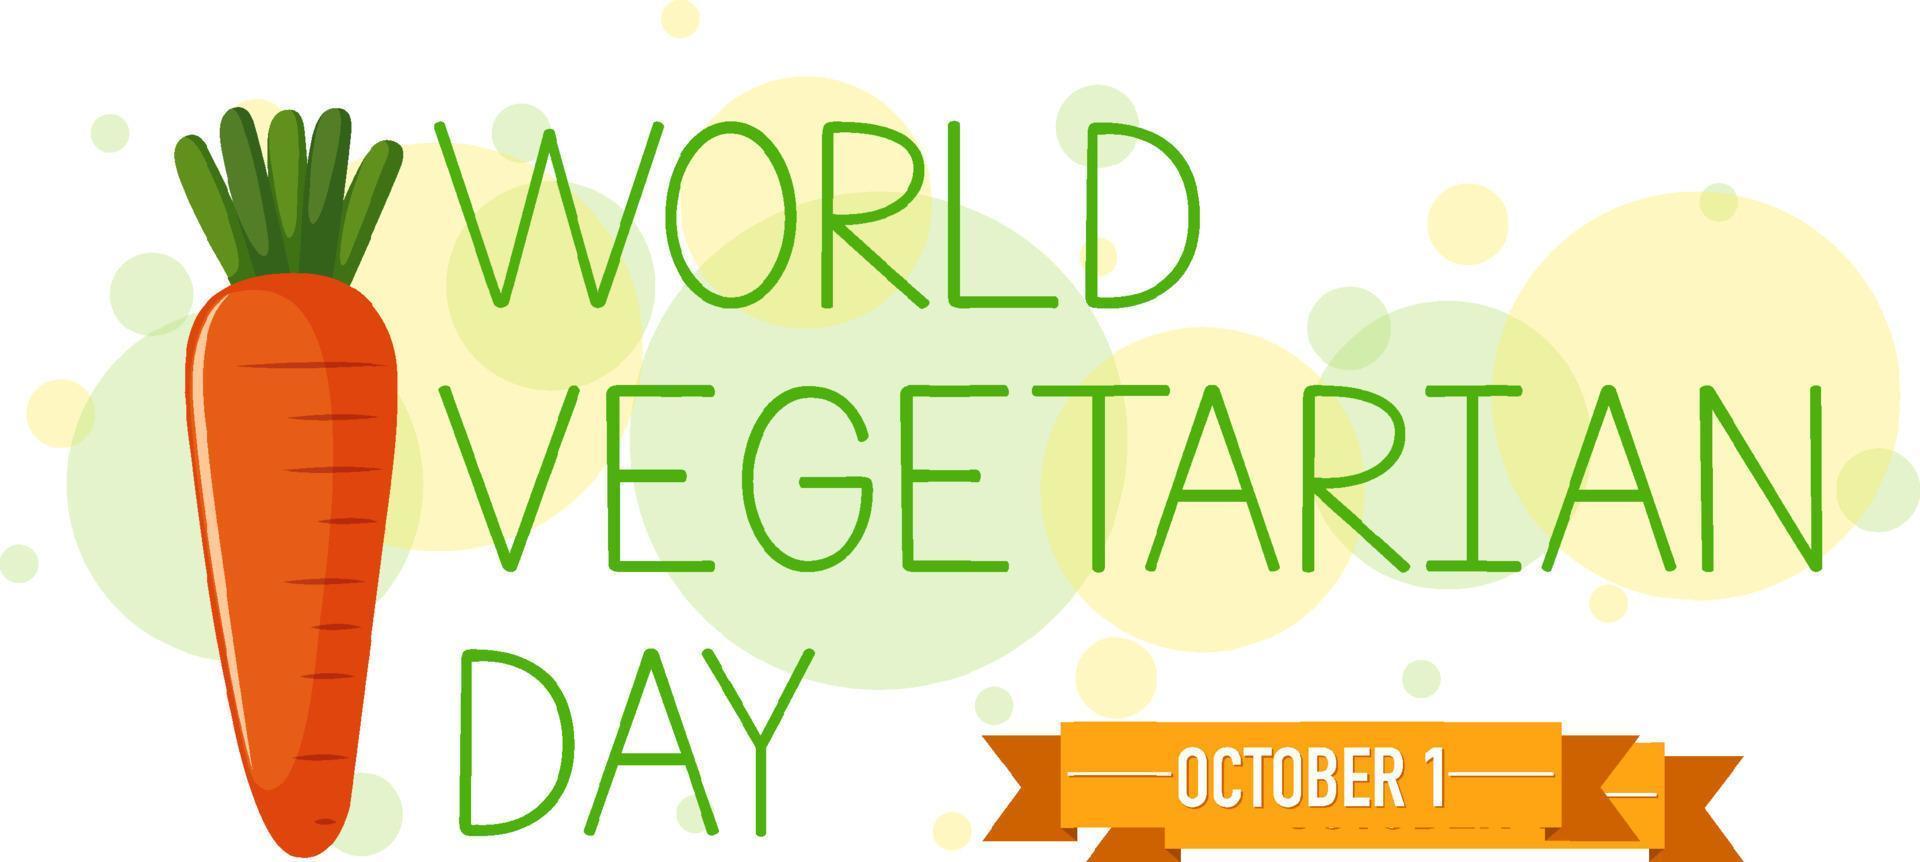 World Vegetarian Day logo wit a carrot on white background vector